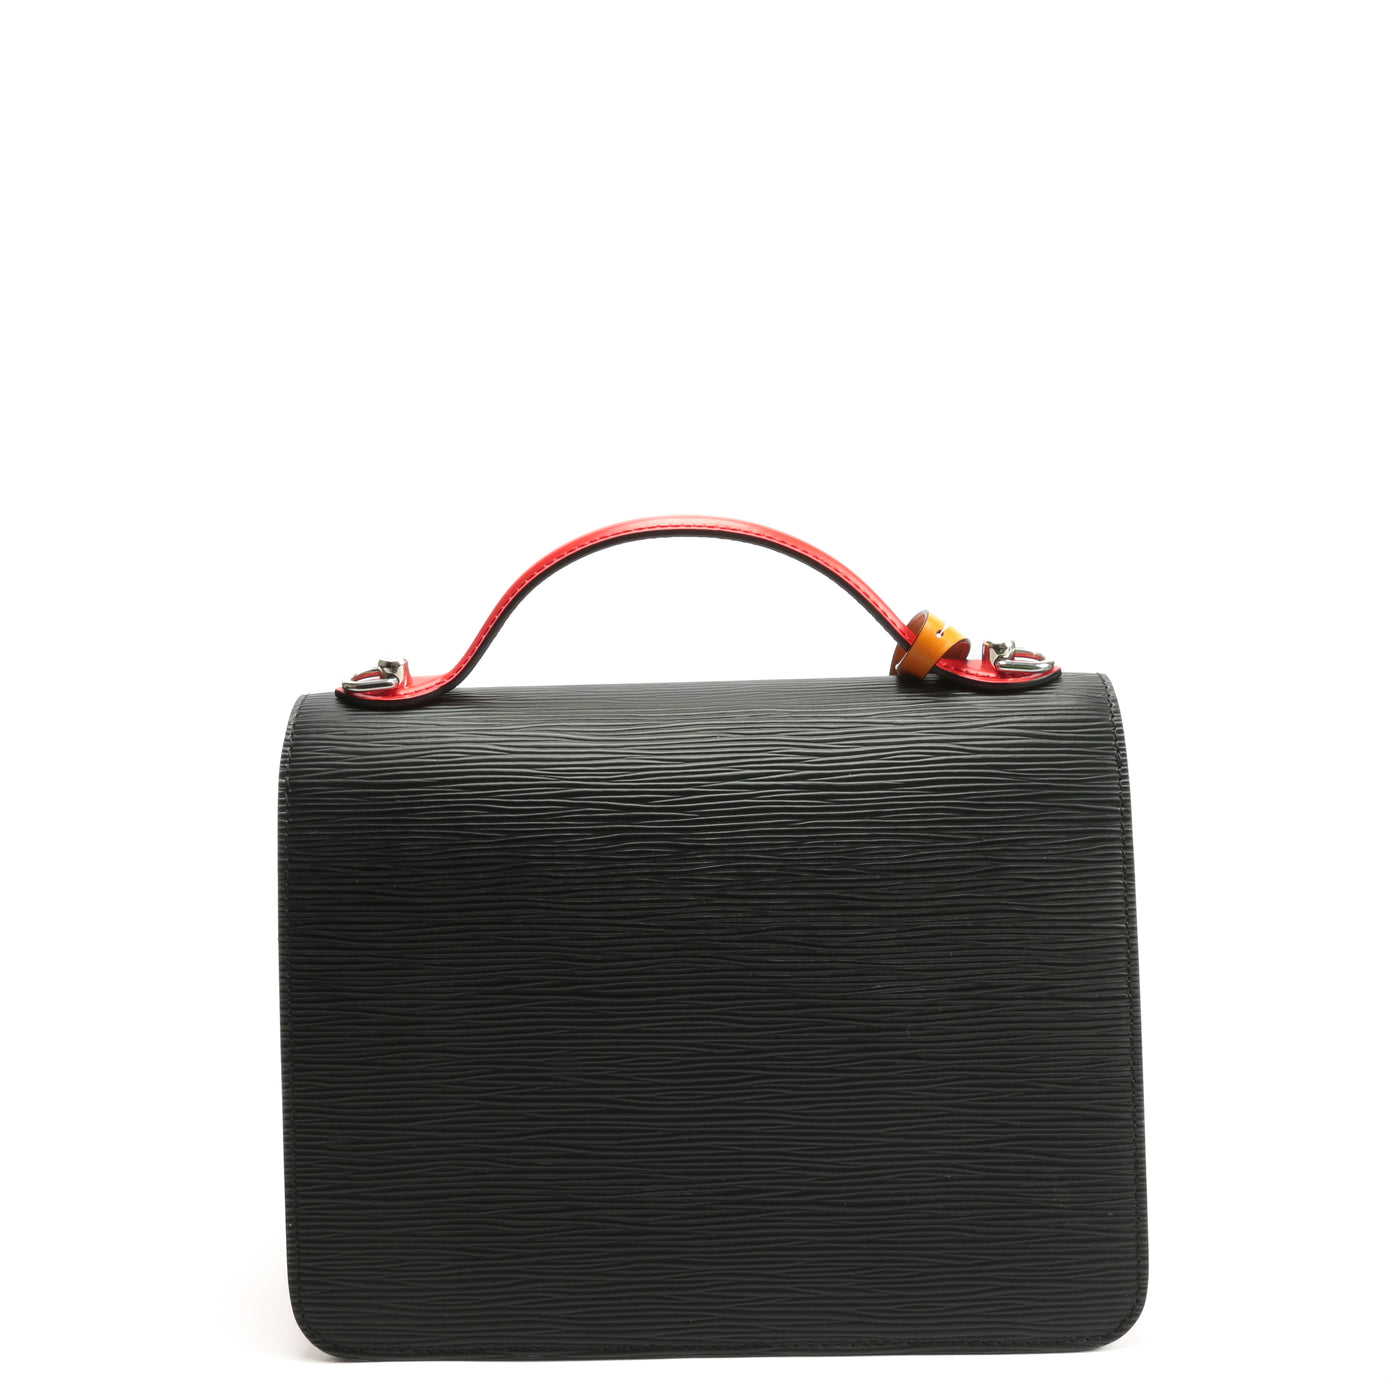 Neo Monceau leather crossbody bag